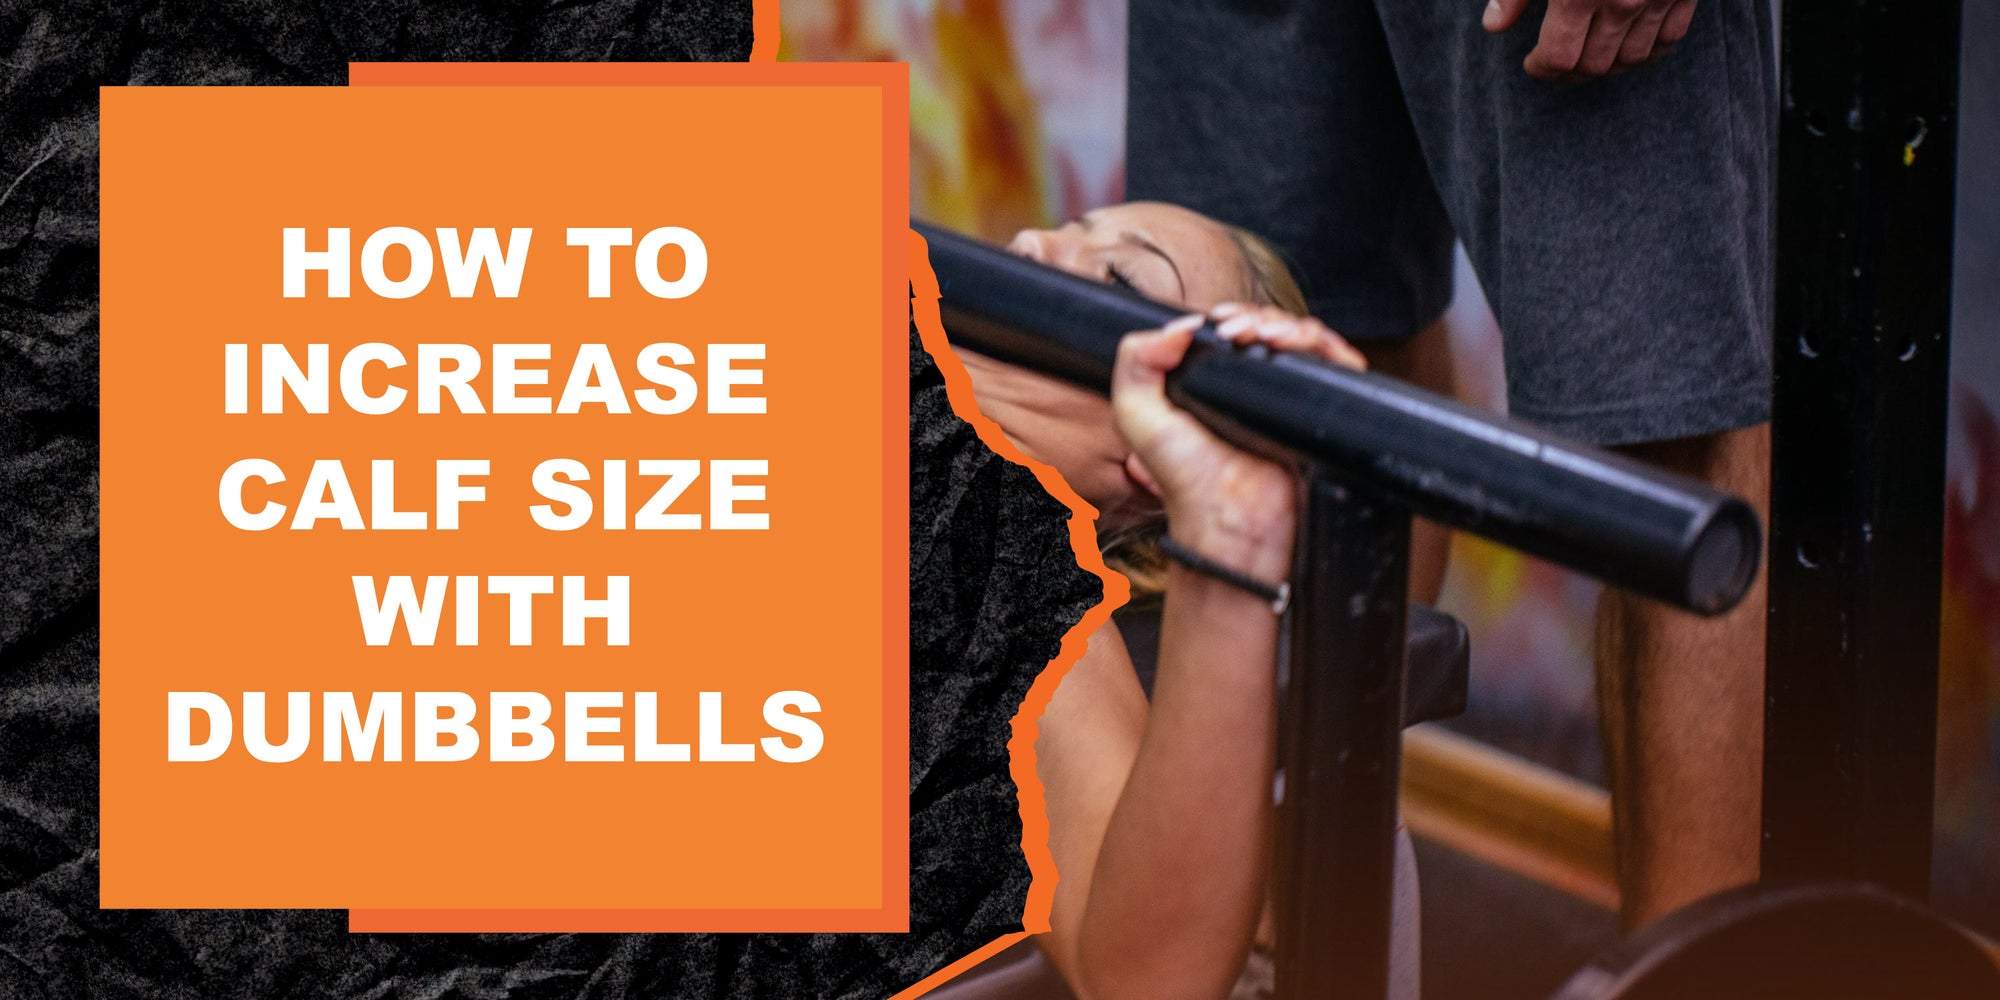 How to Increase Calf Size with Dumbbells